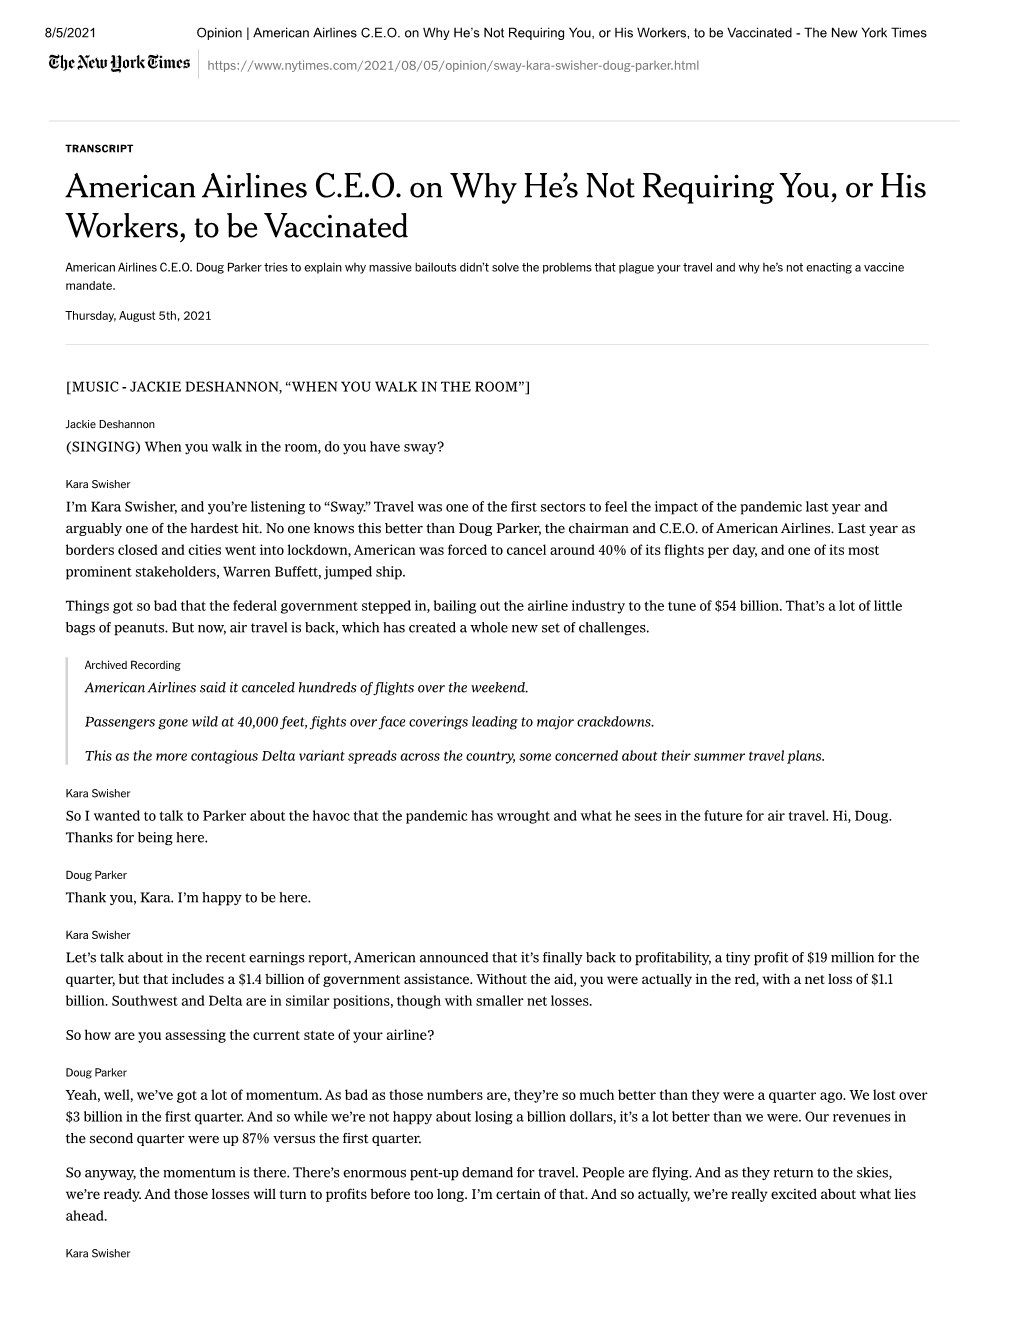 American Airlines C.E.O. on Why He's Not Requiring You, Or His Workers, to Be Vaccinated